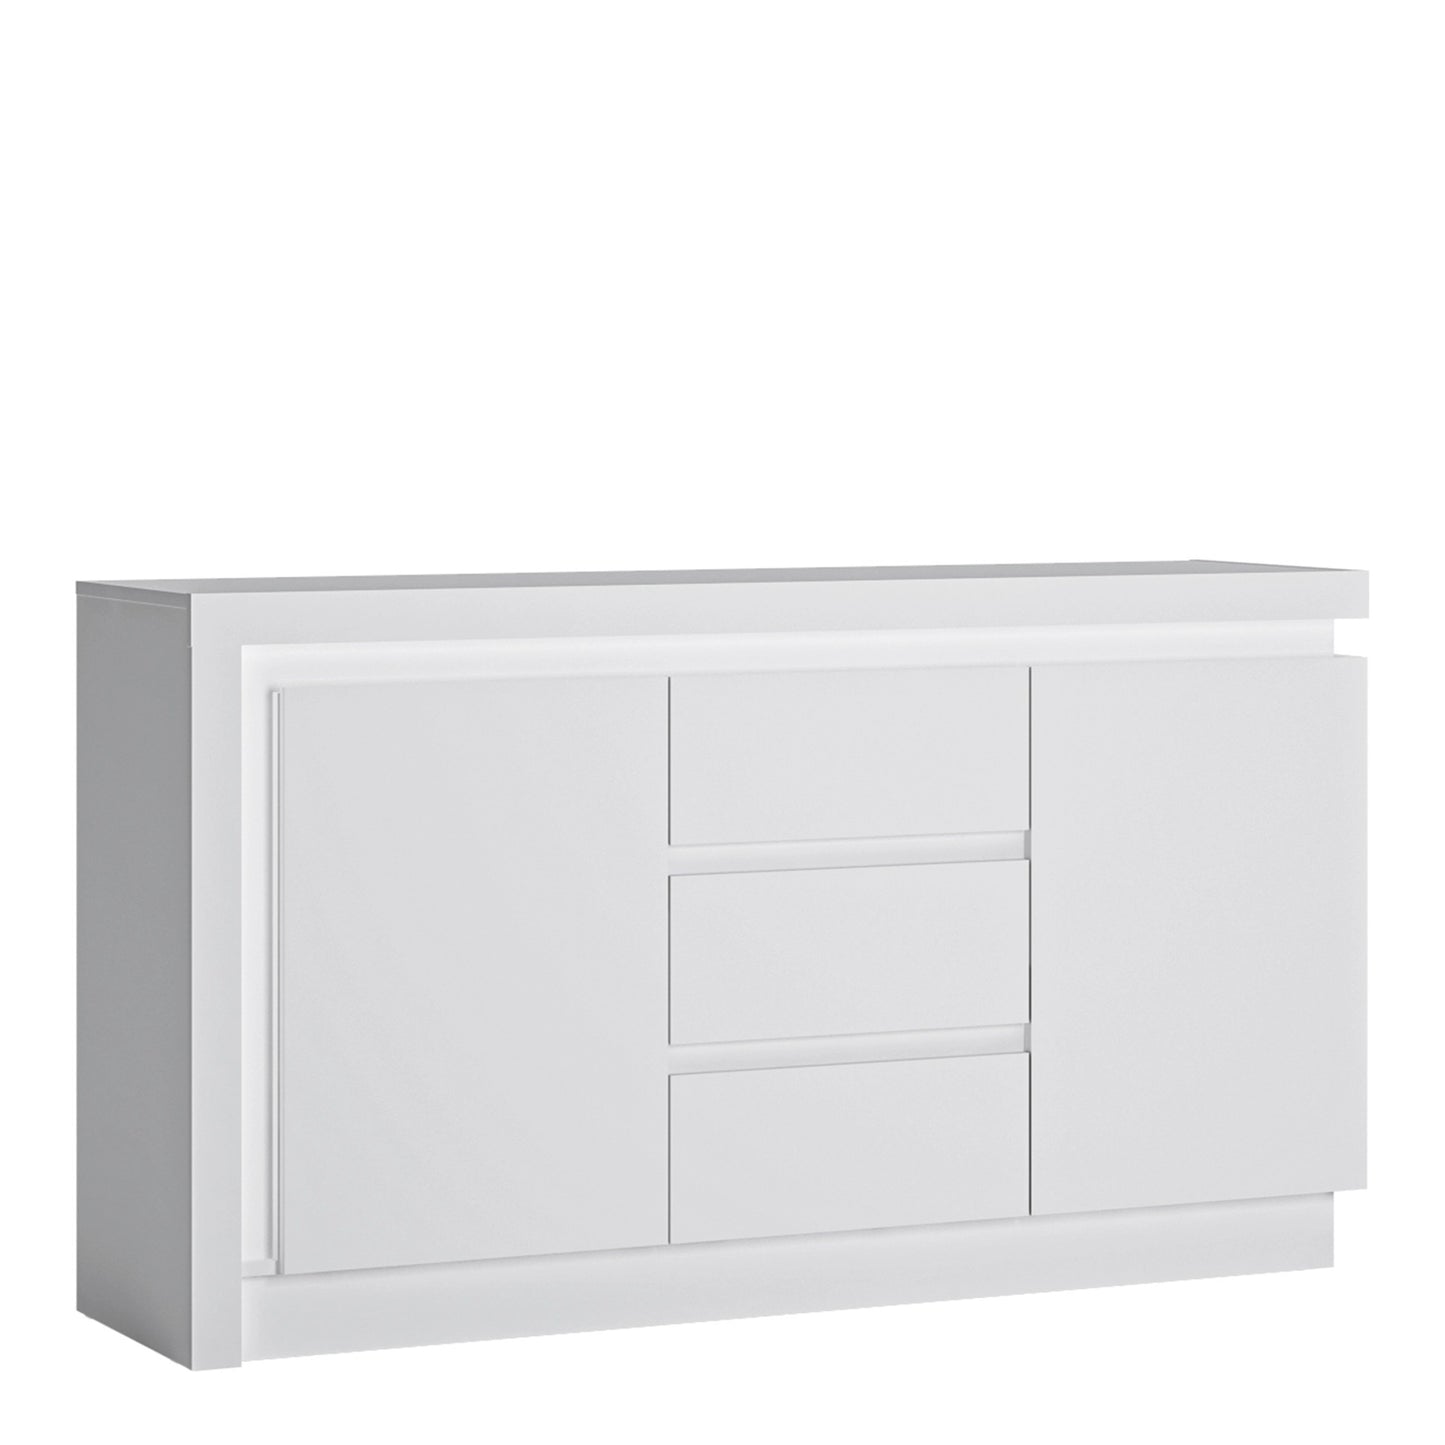 Furniture To Go Lyon 2 Door 3 Drawer Sideboard (Including Led Lighting) in White & High Gloss